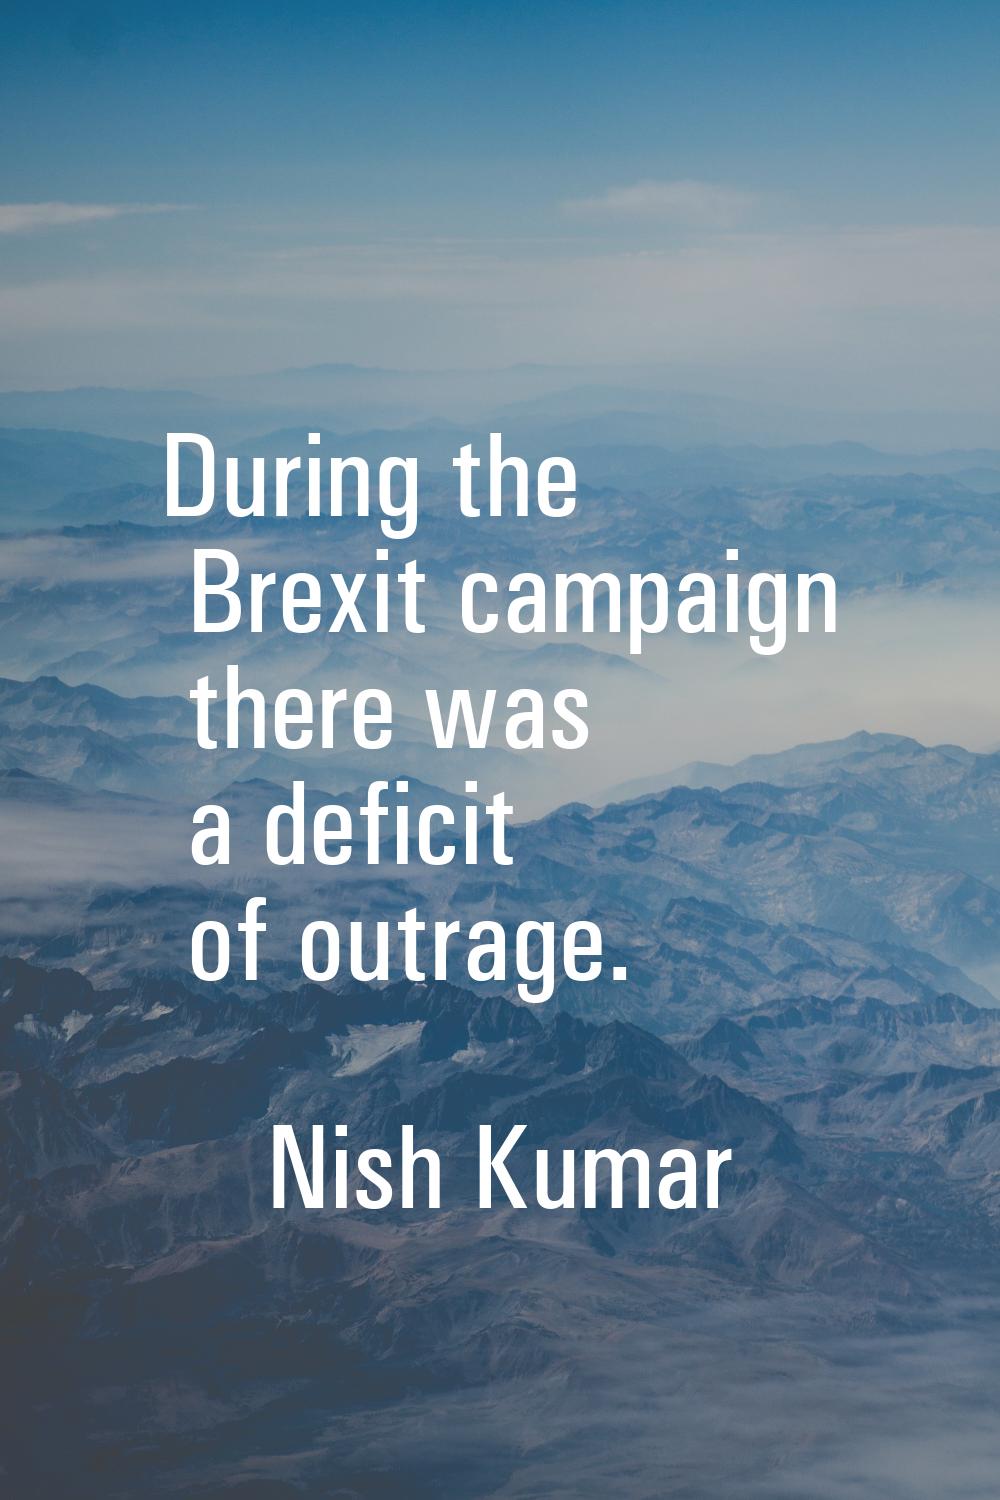 During the Brexit campaign there was a deficit of outrage.